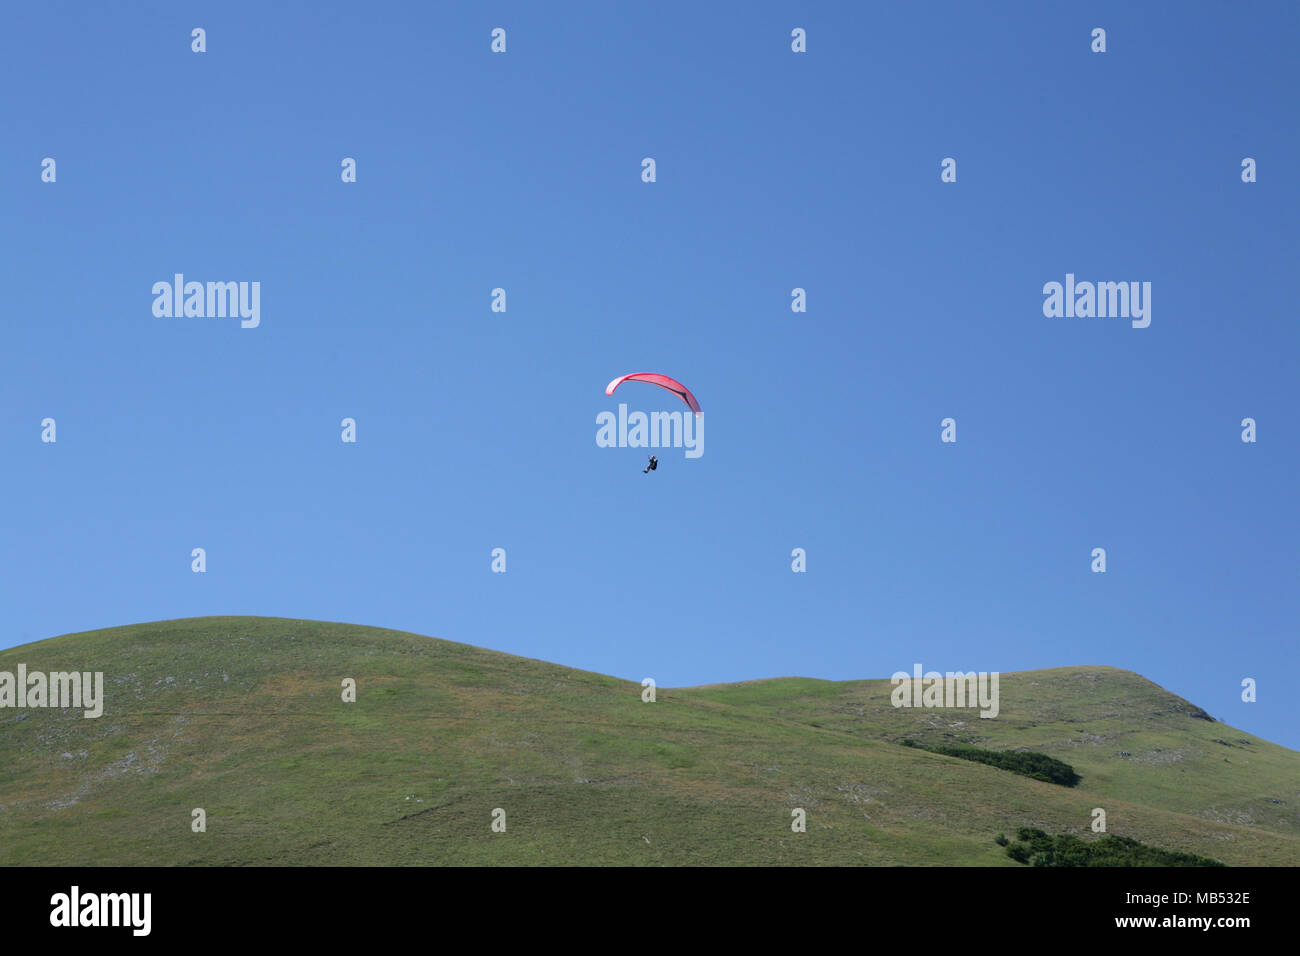 Hang glider over the mountain Stock Photo